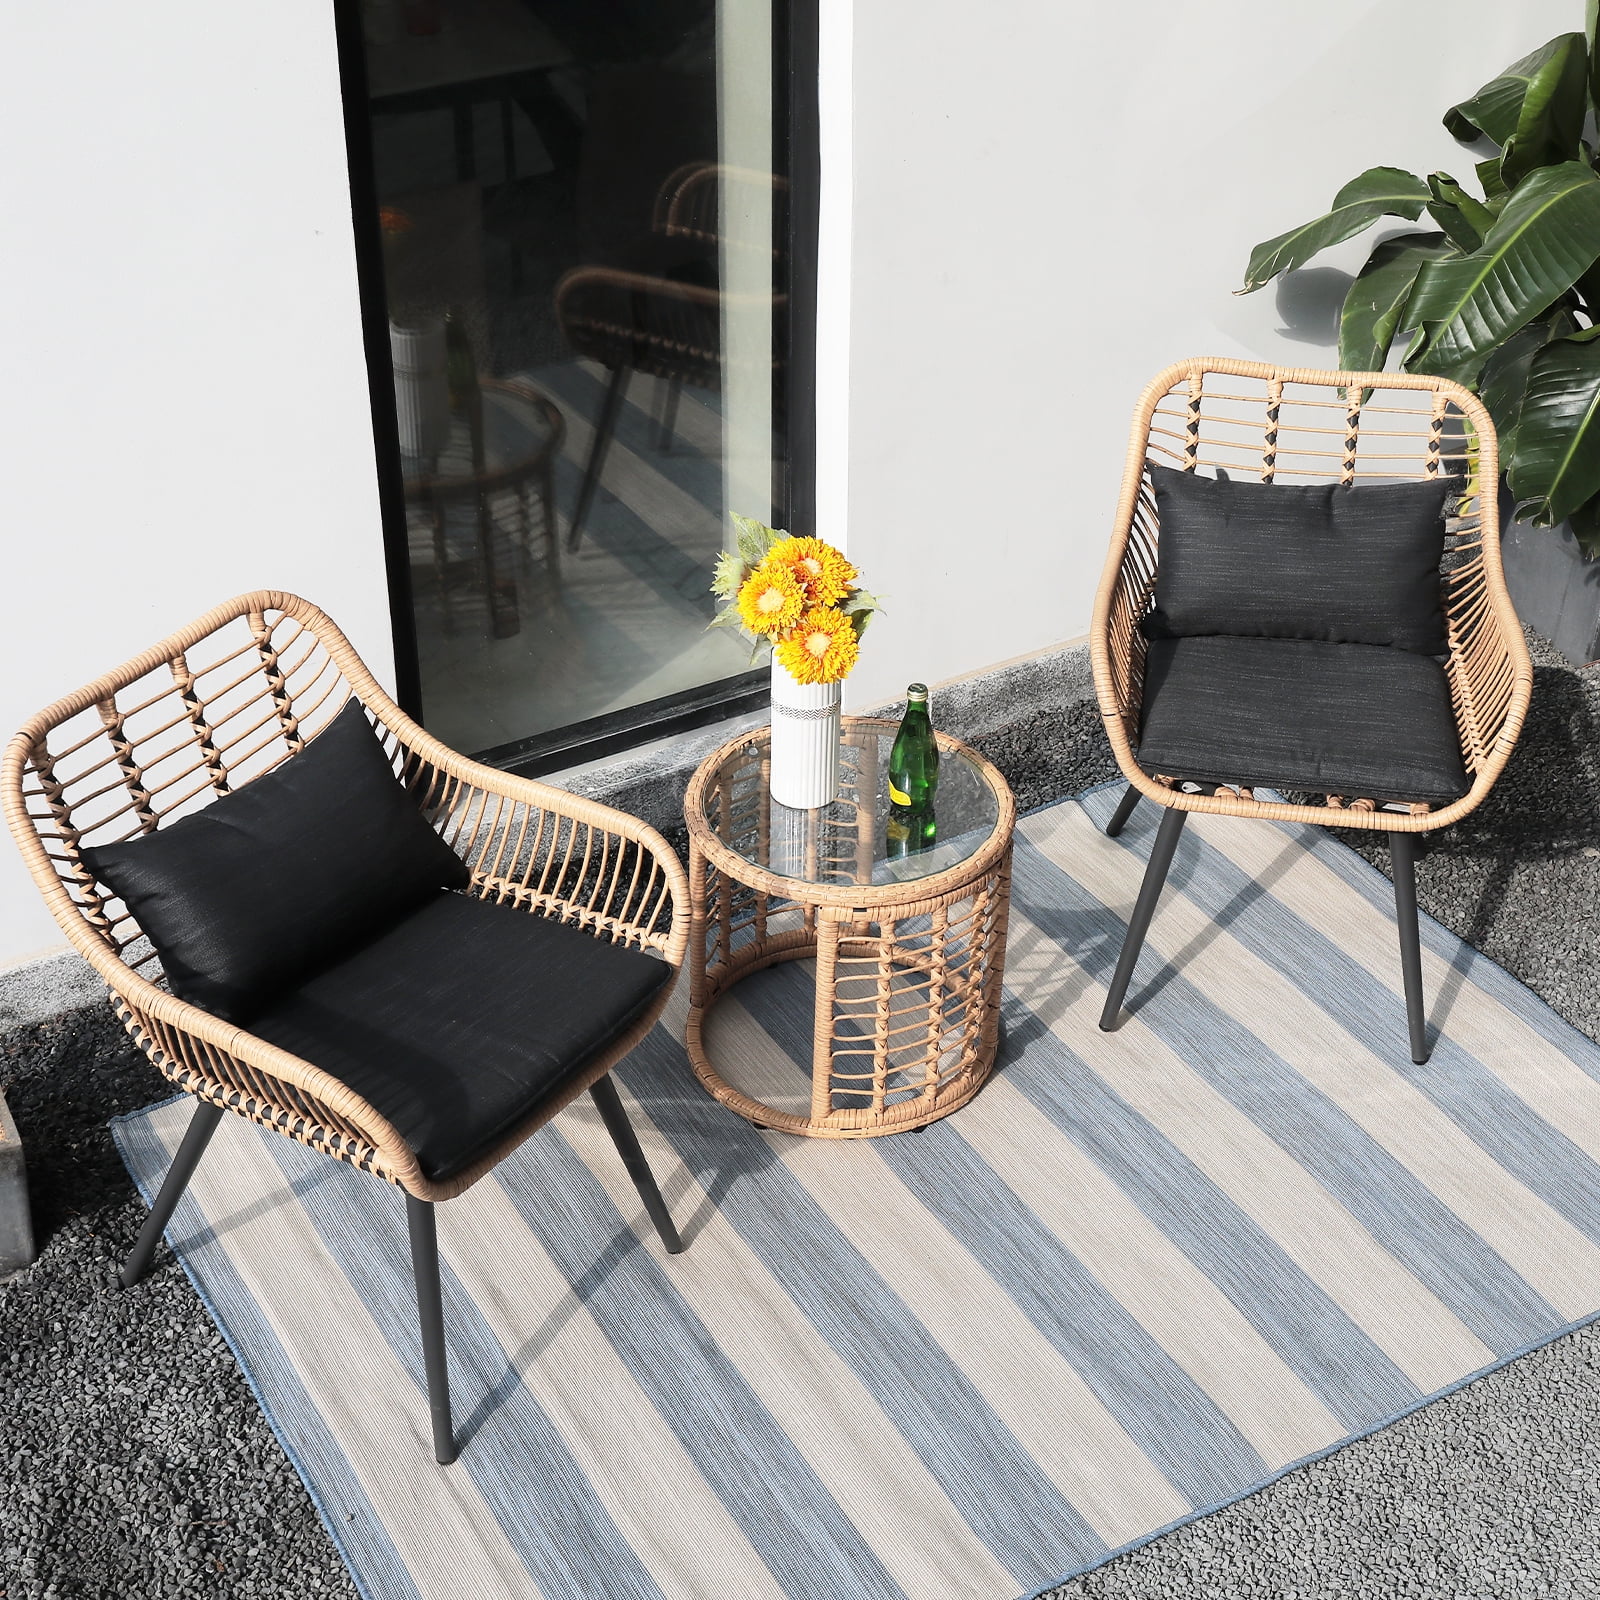 Patio Conversation Sets with Glass Coffee Table Black Rattan with Blue Cushion JOVNO 3 Pieces Patio Bistro Set Outdoor Modern Bistro Rattan Chairs Wicker Patio Furniture Sets 